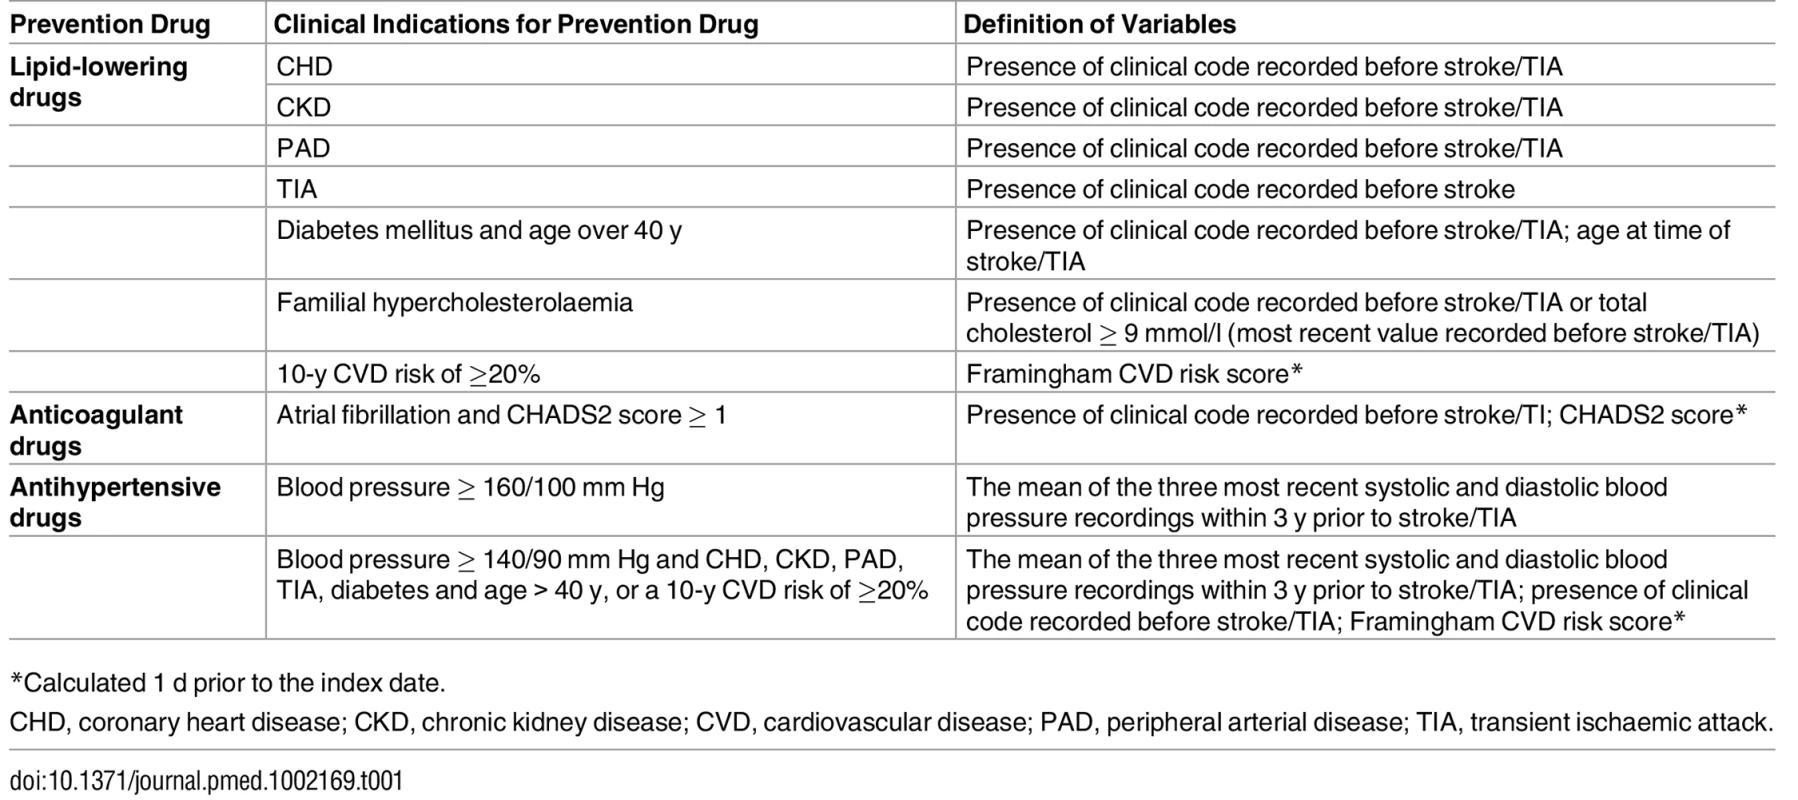 Clinical indications for lipid-lowering, anticoagulant, and antihypertensive drugs.